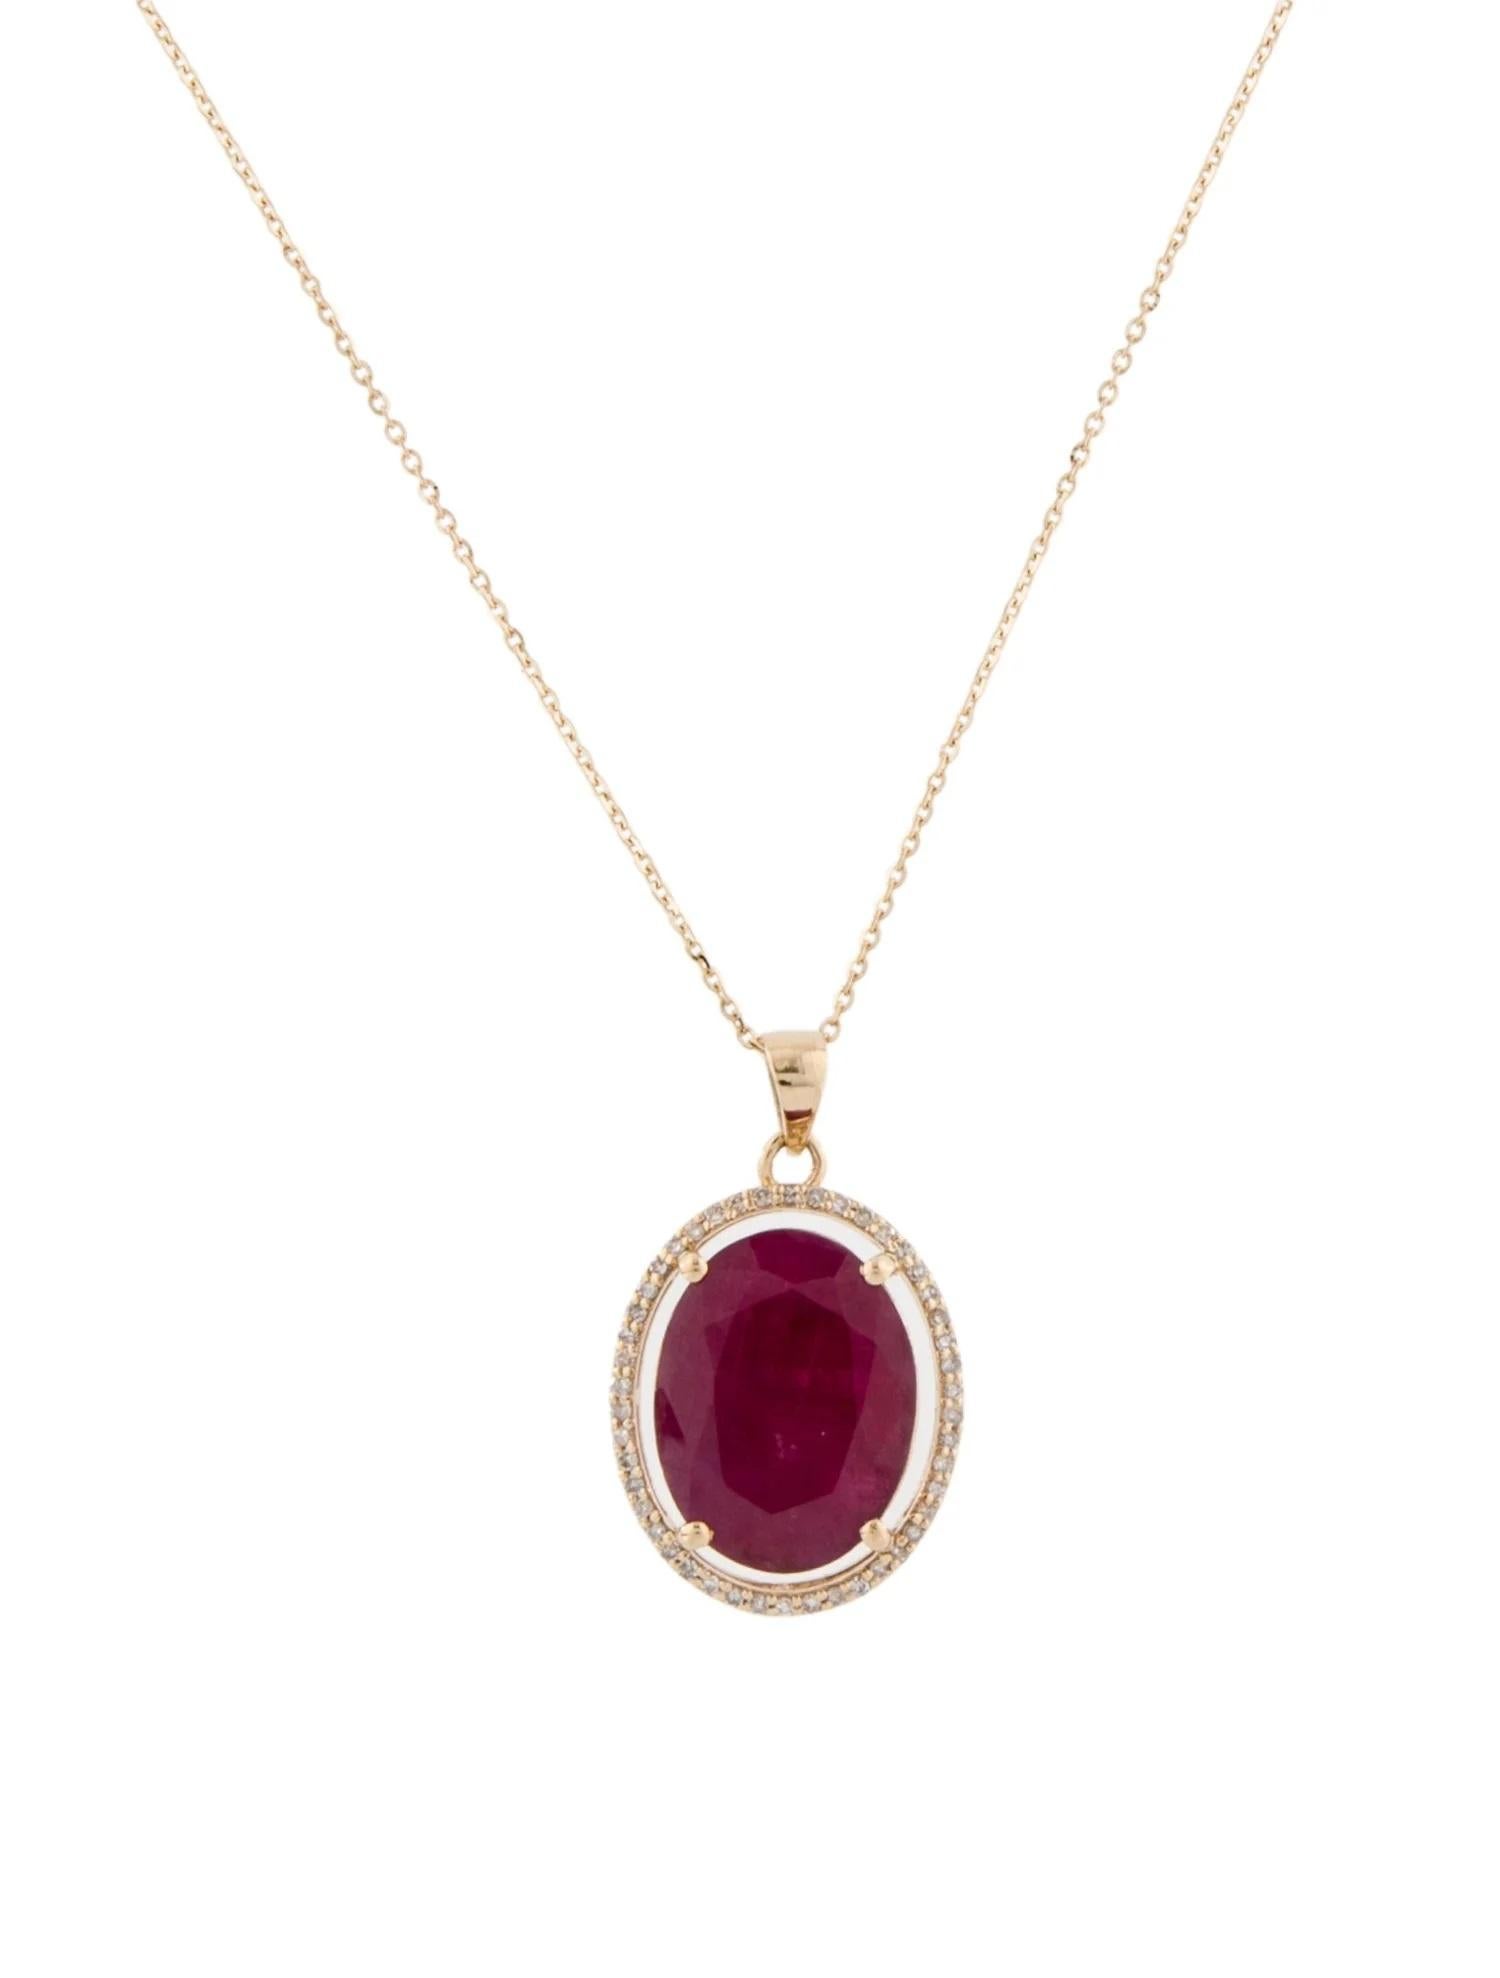 Oval Cut 14K Ruby & Diamond Pendant Necklace  Faceted Oval Ruby  5.42ct  Yellow Gold For Sale